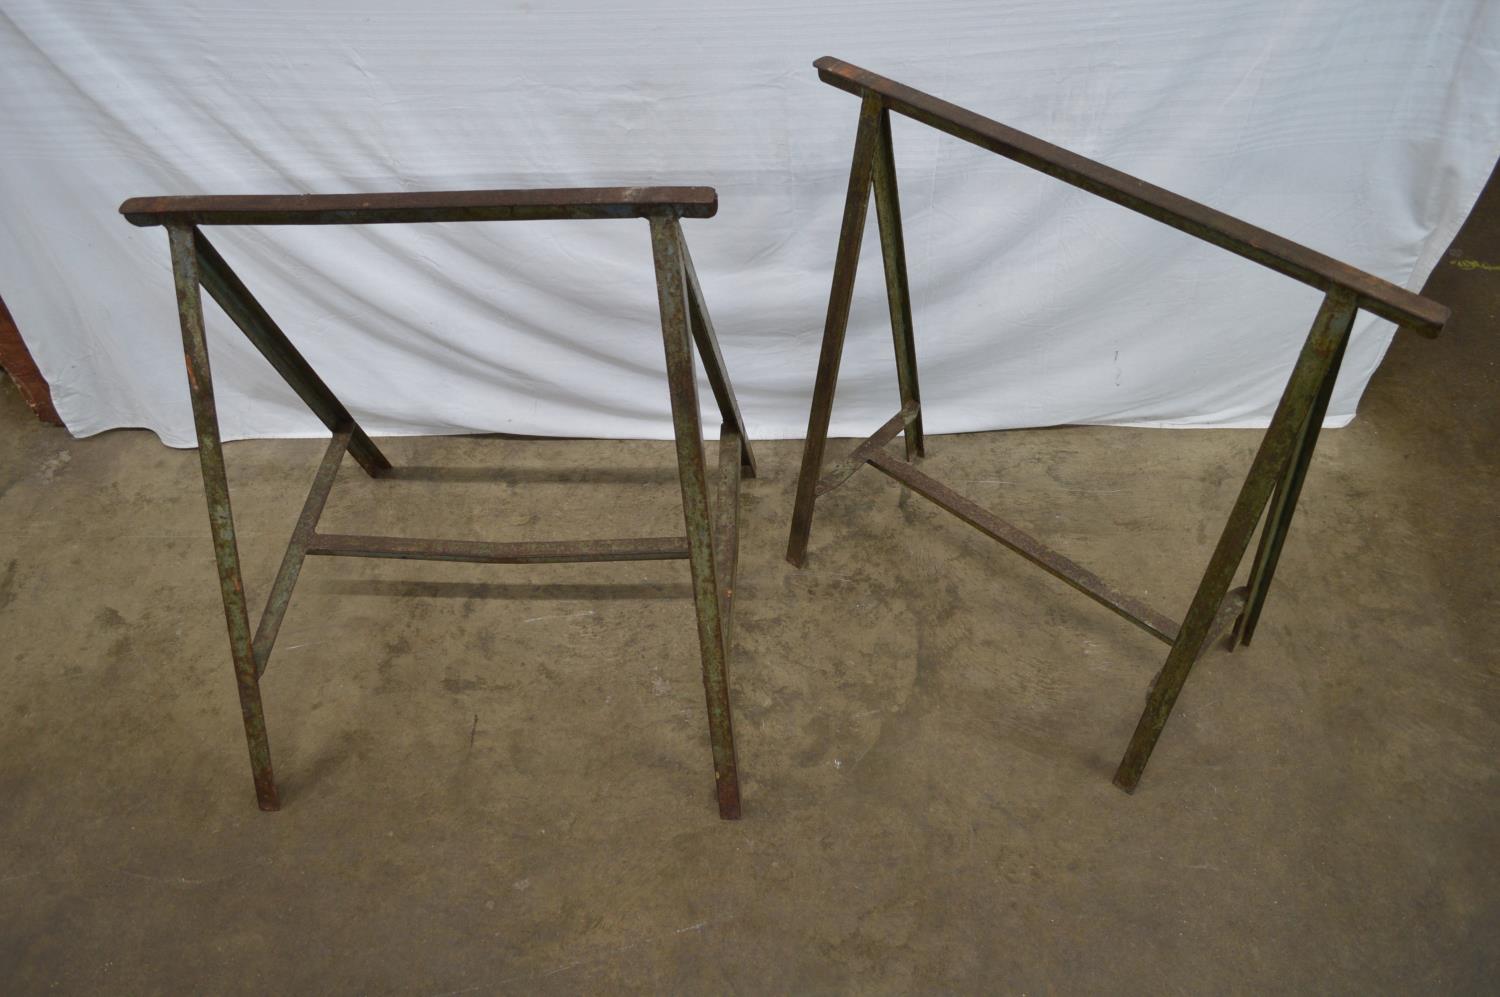 Two metal trestle stands - 70cm and 80cm wide x 77cm tall together with two small wooden saw - Image 2 of 3